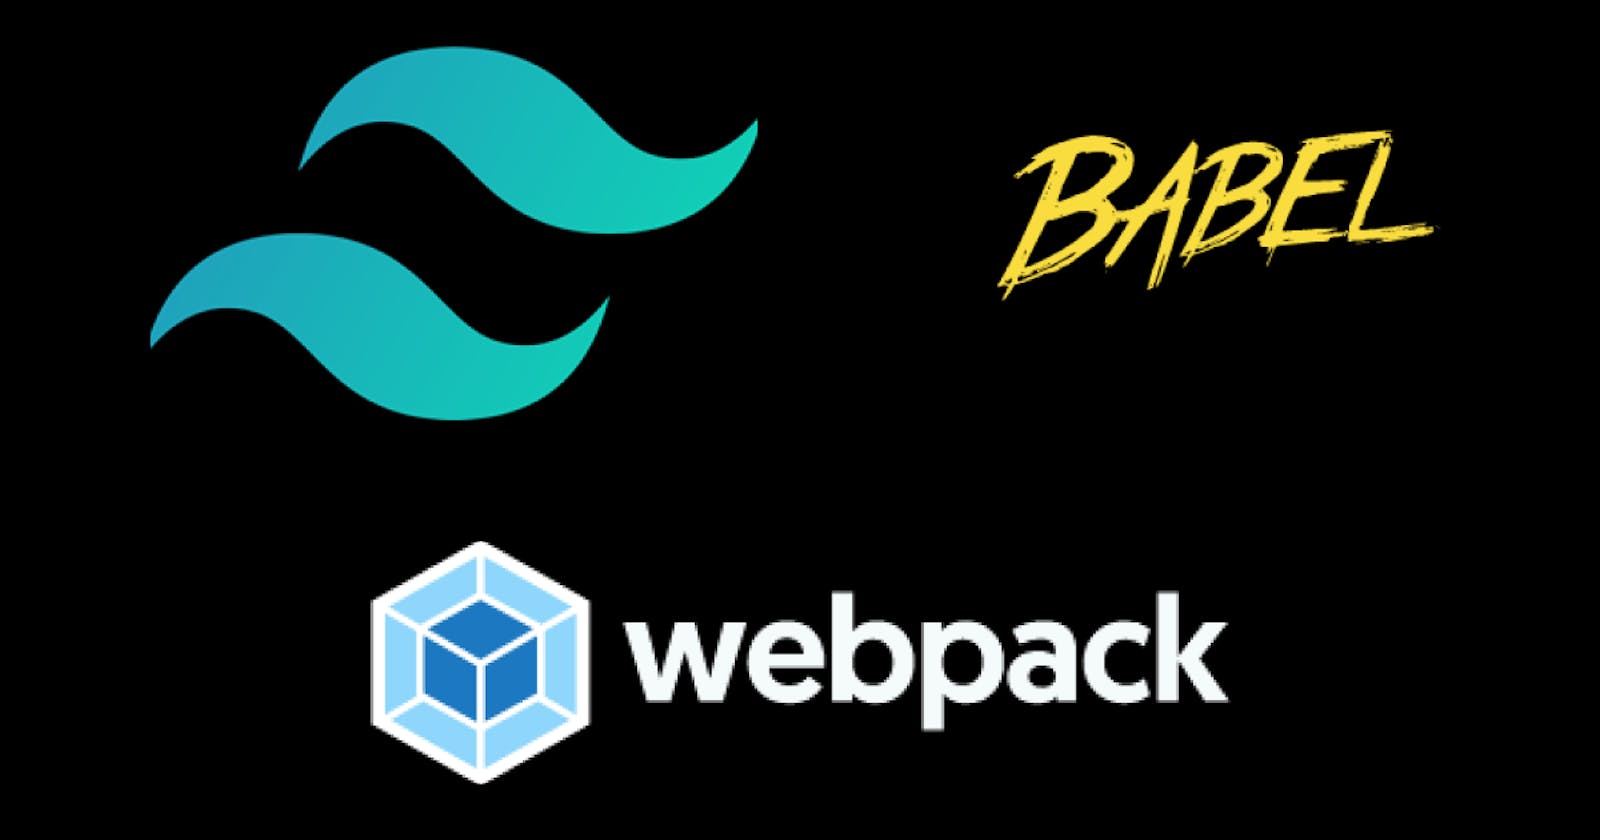 A modern project flow with babel, webpack, and TailwindCSS